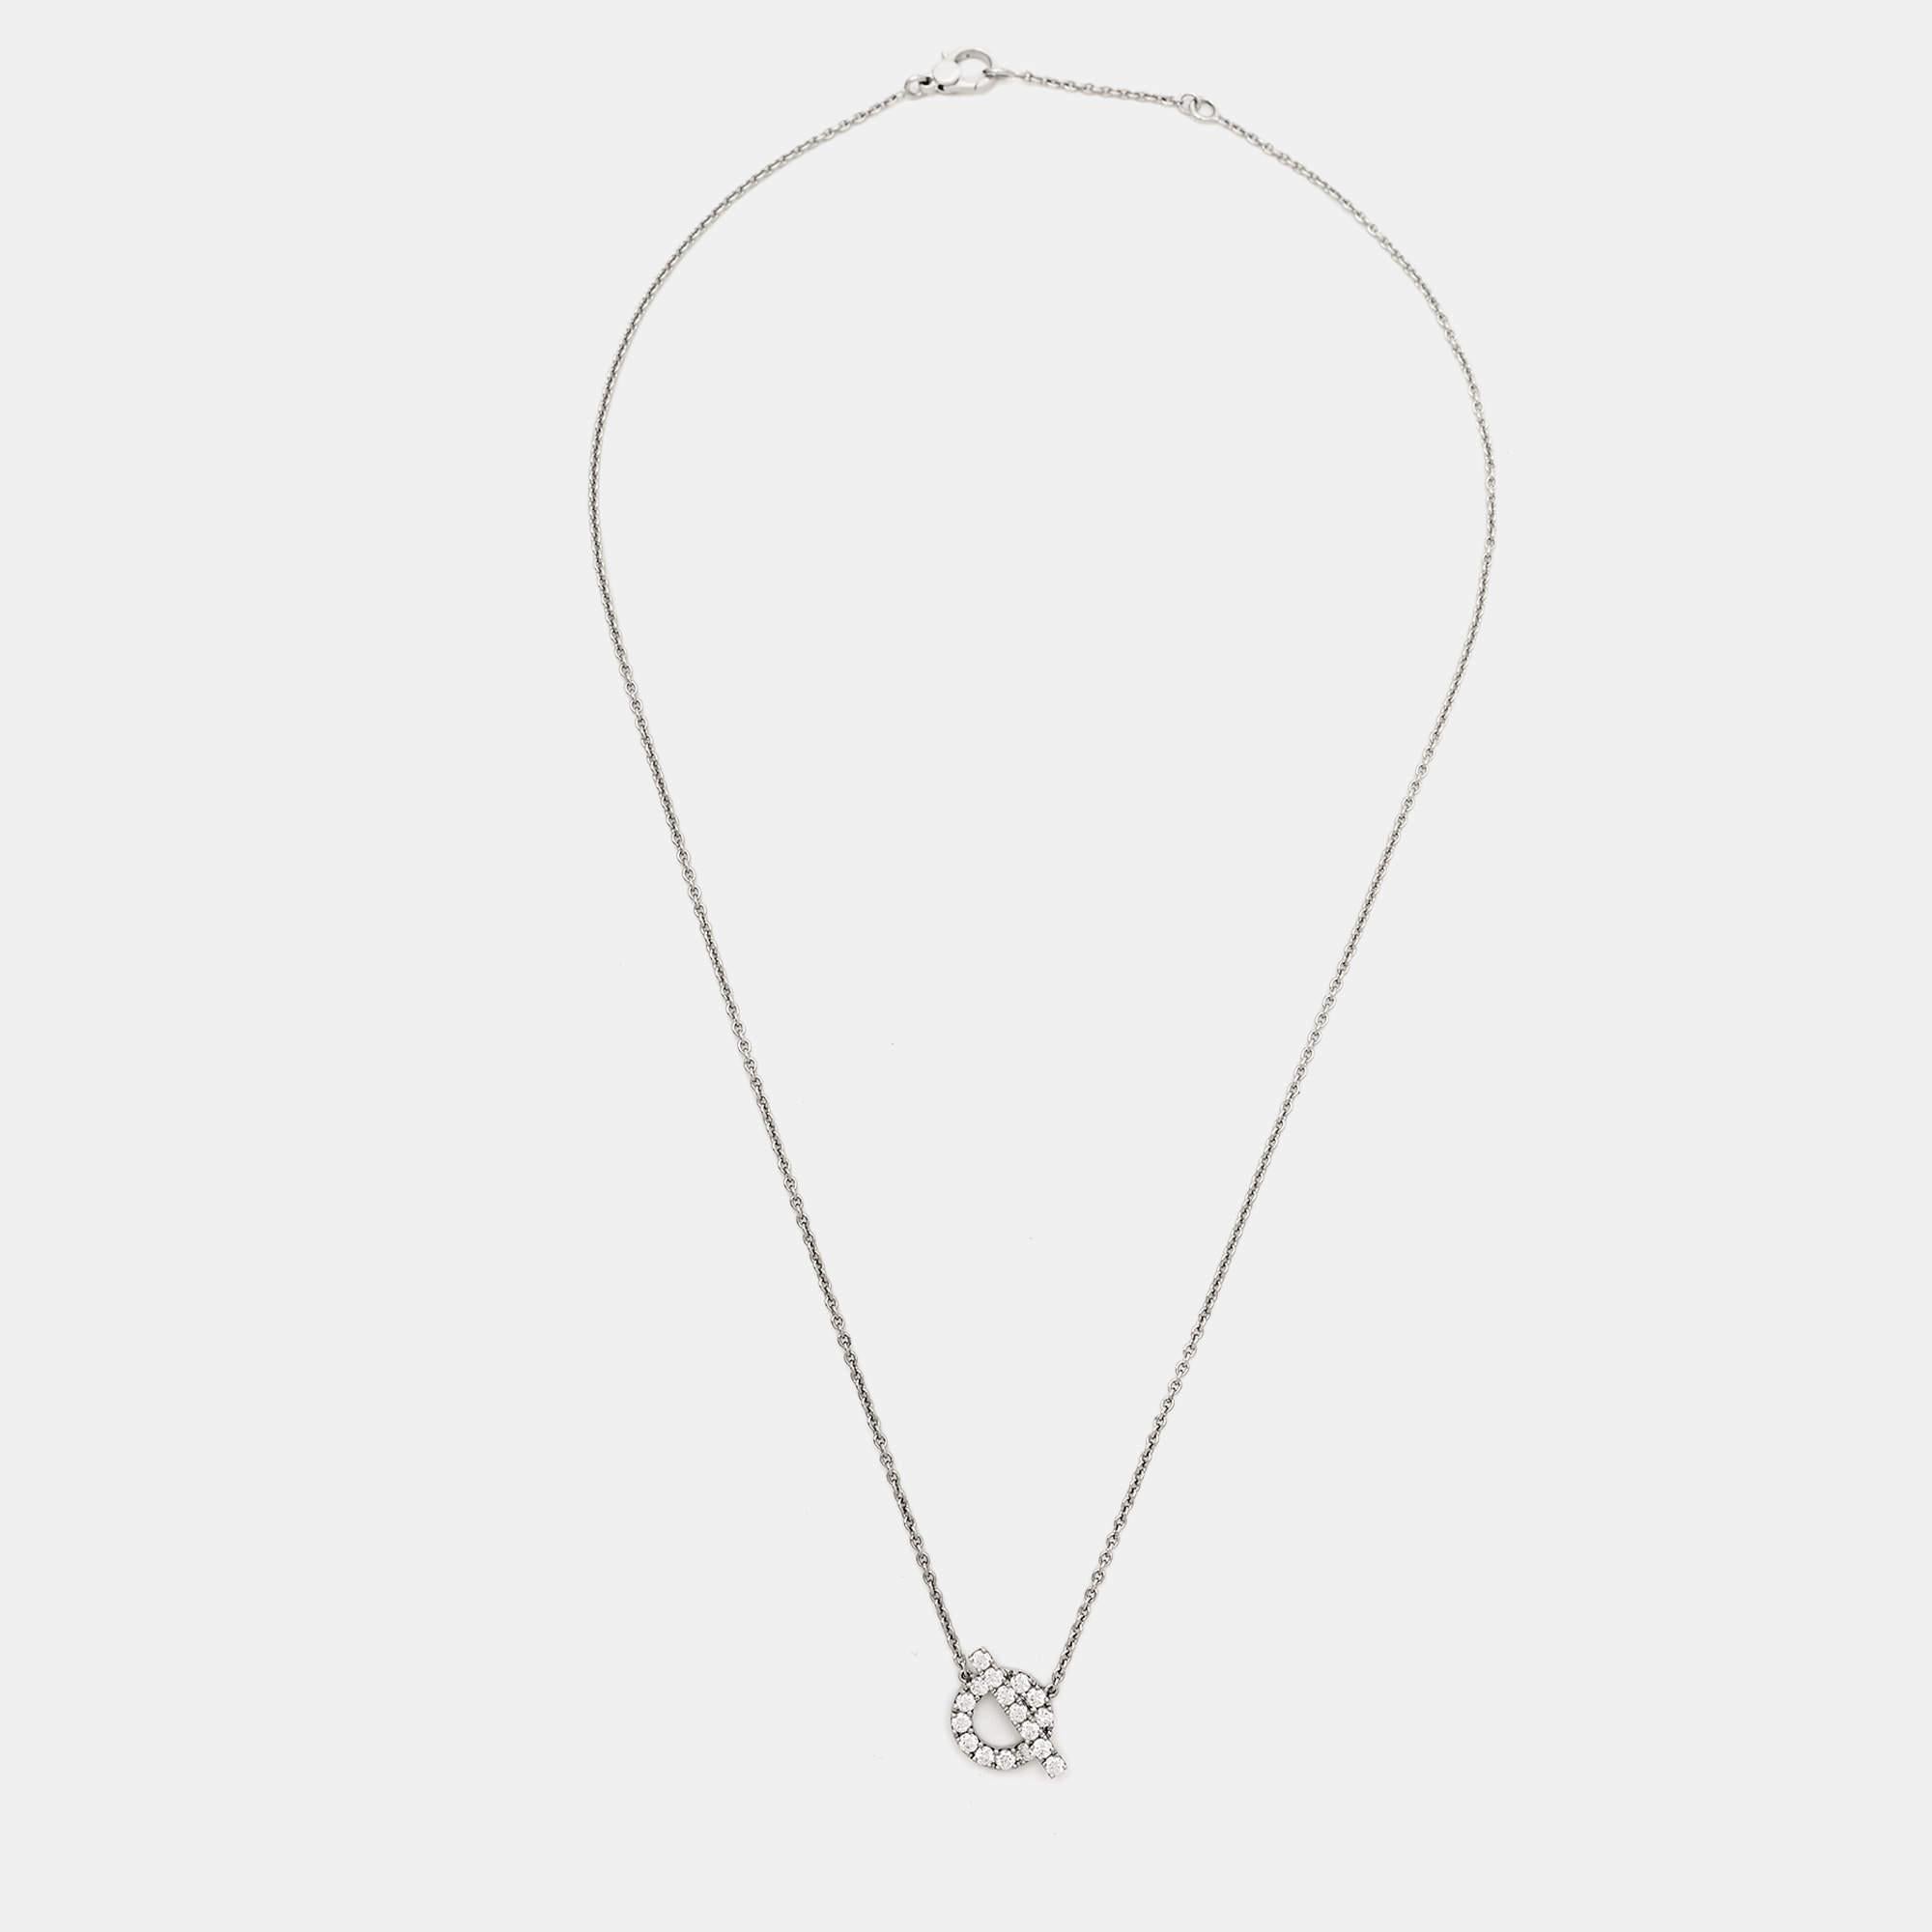 The Hermès Finesse necklace is an exquisite piece crafted from 18k white gold. Delicate and elegant, it features a fine chain adorned with a pendant with brilliant-cut diamonds, exuding timeless sophistication. This necklace seamlessly blends luxury